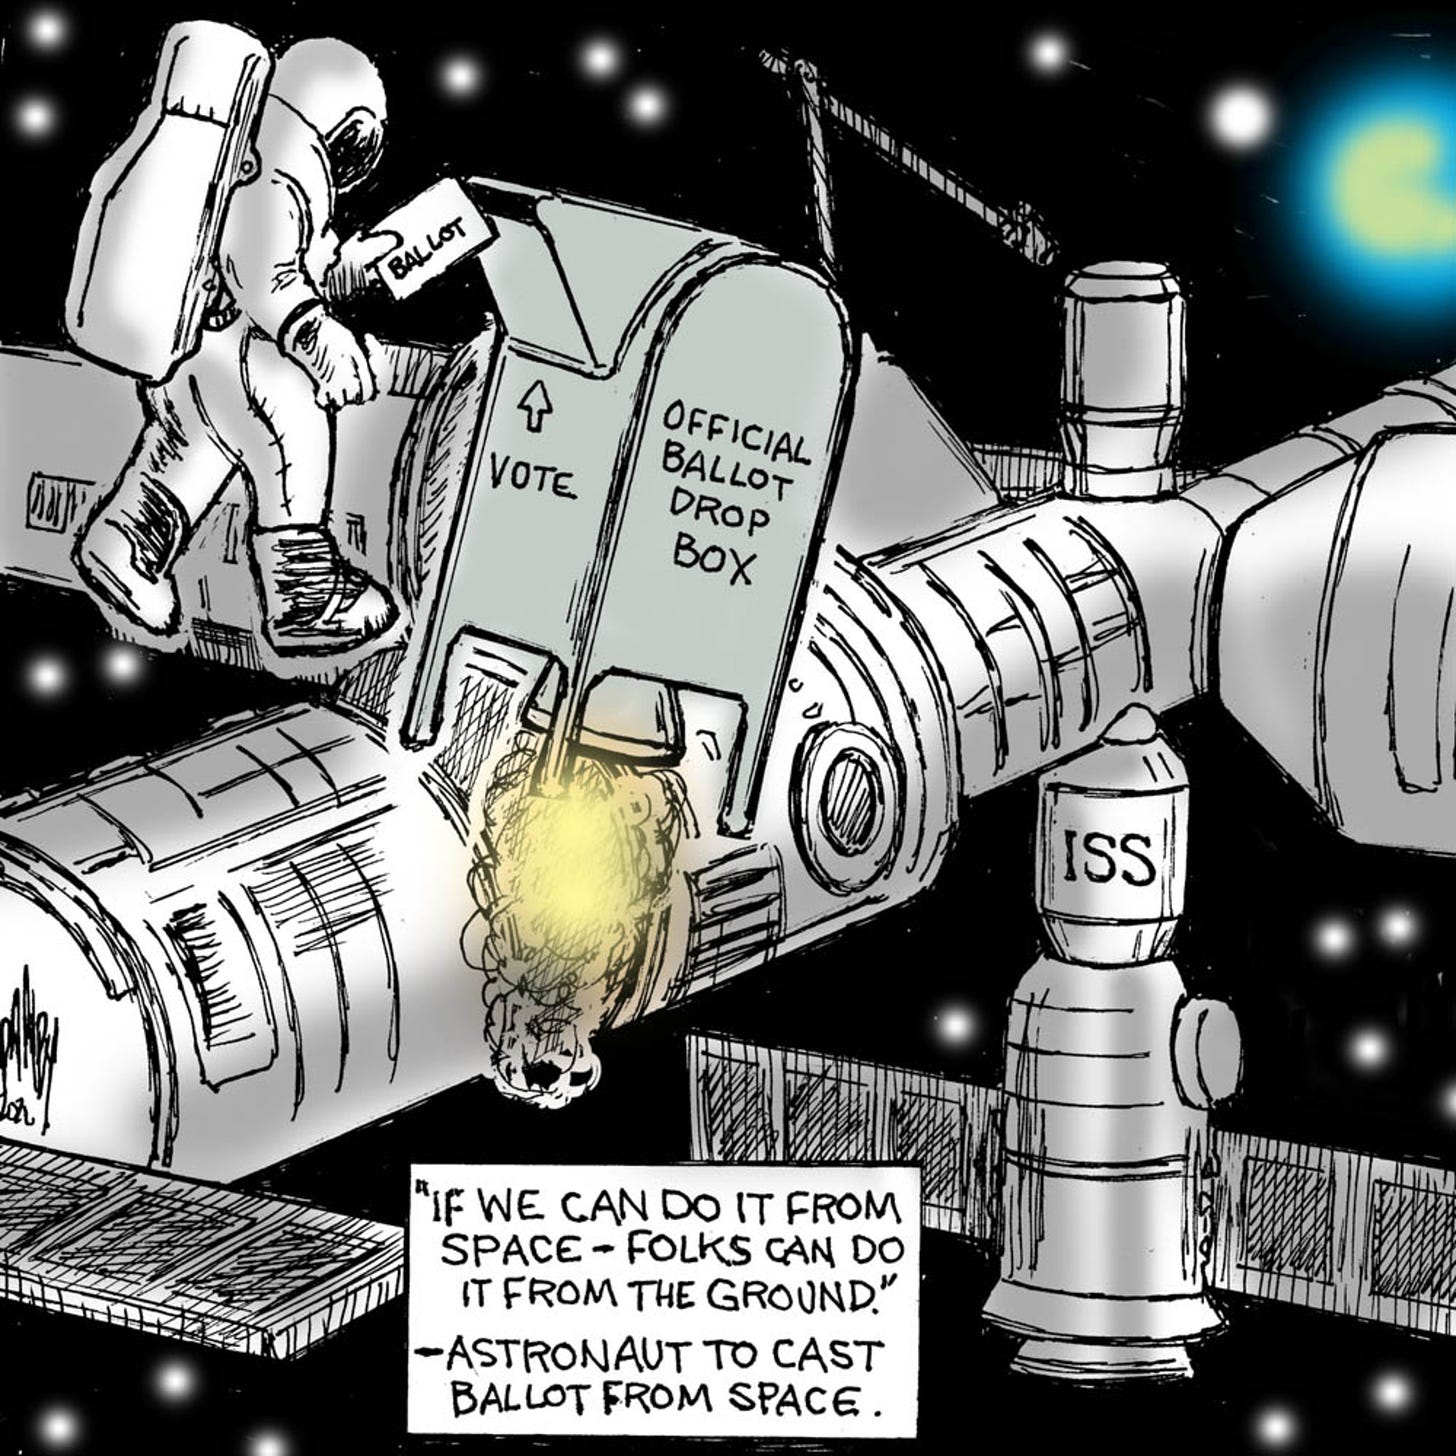 Voting in space